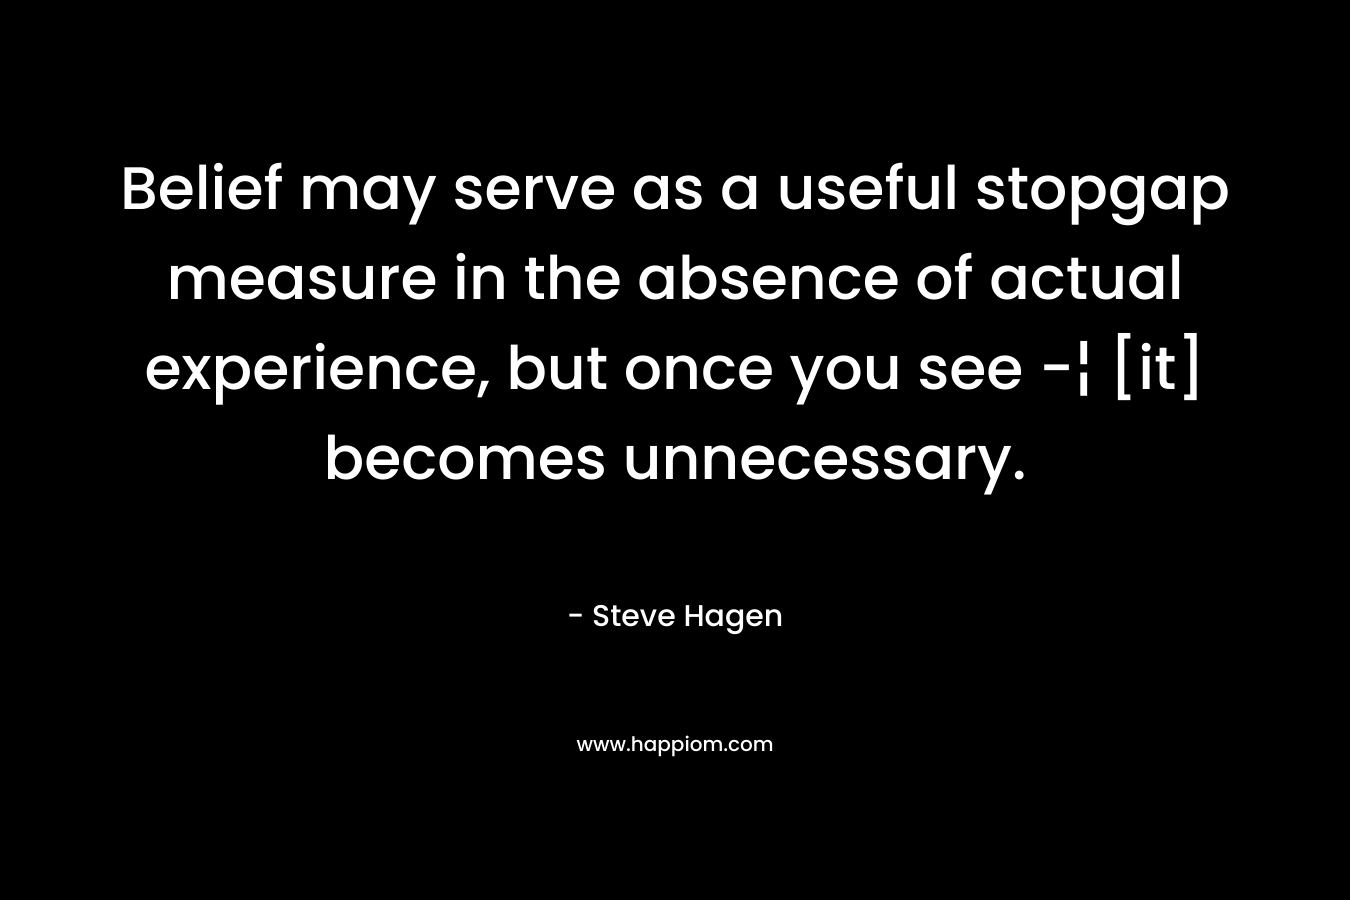 Belief may serve as a useful stopgap measure in the absence of actual experience, but once you see -¦ [it] becomes unnecessary. – Steve Hagen